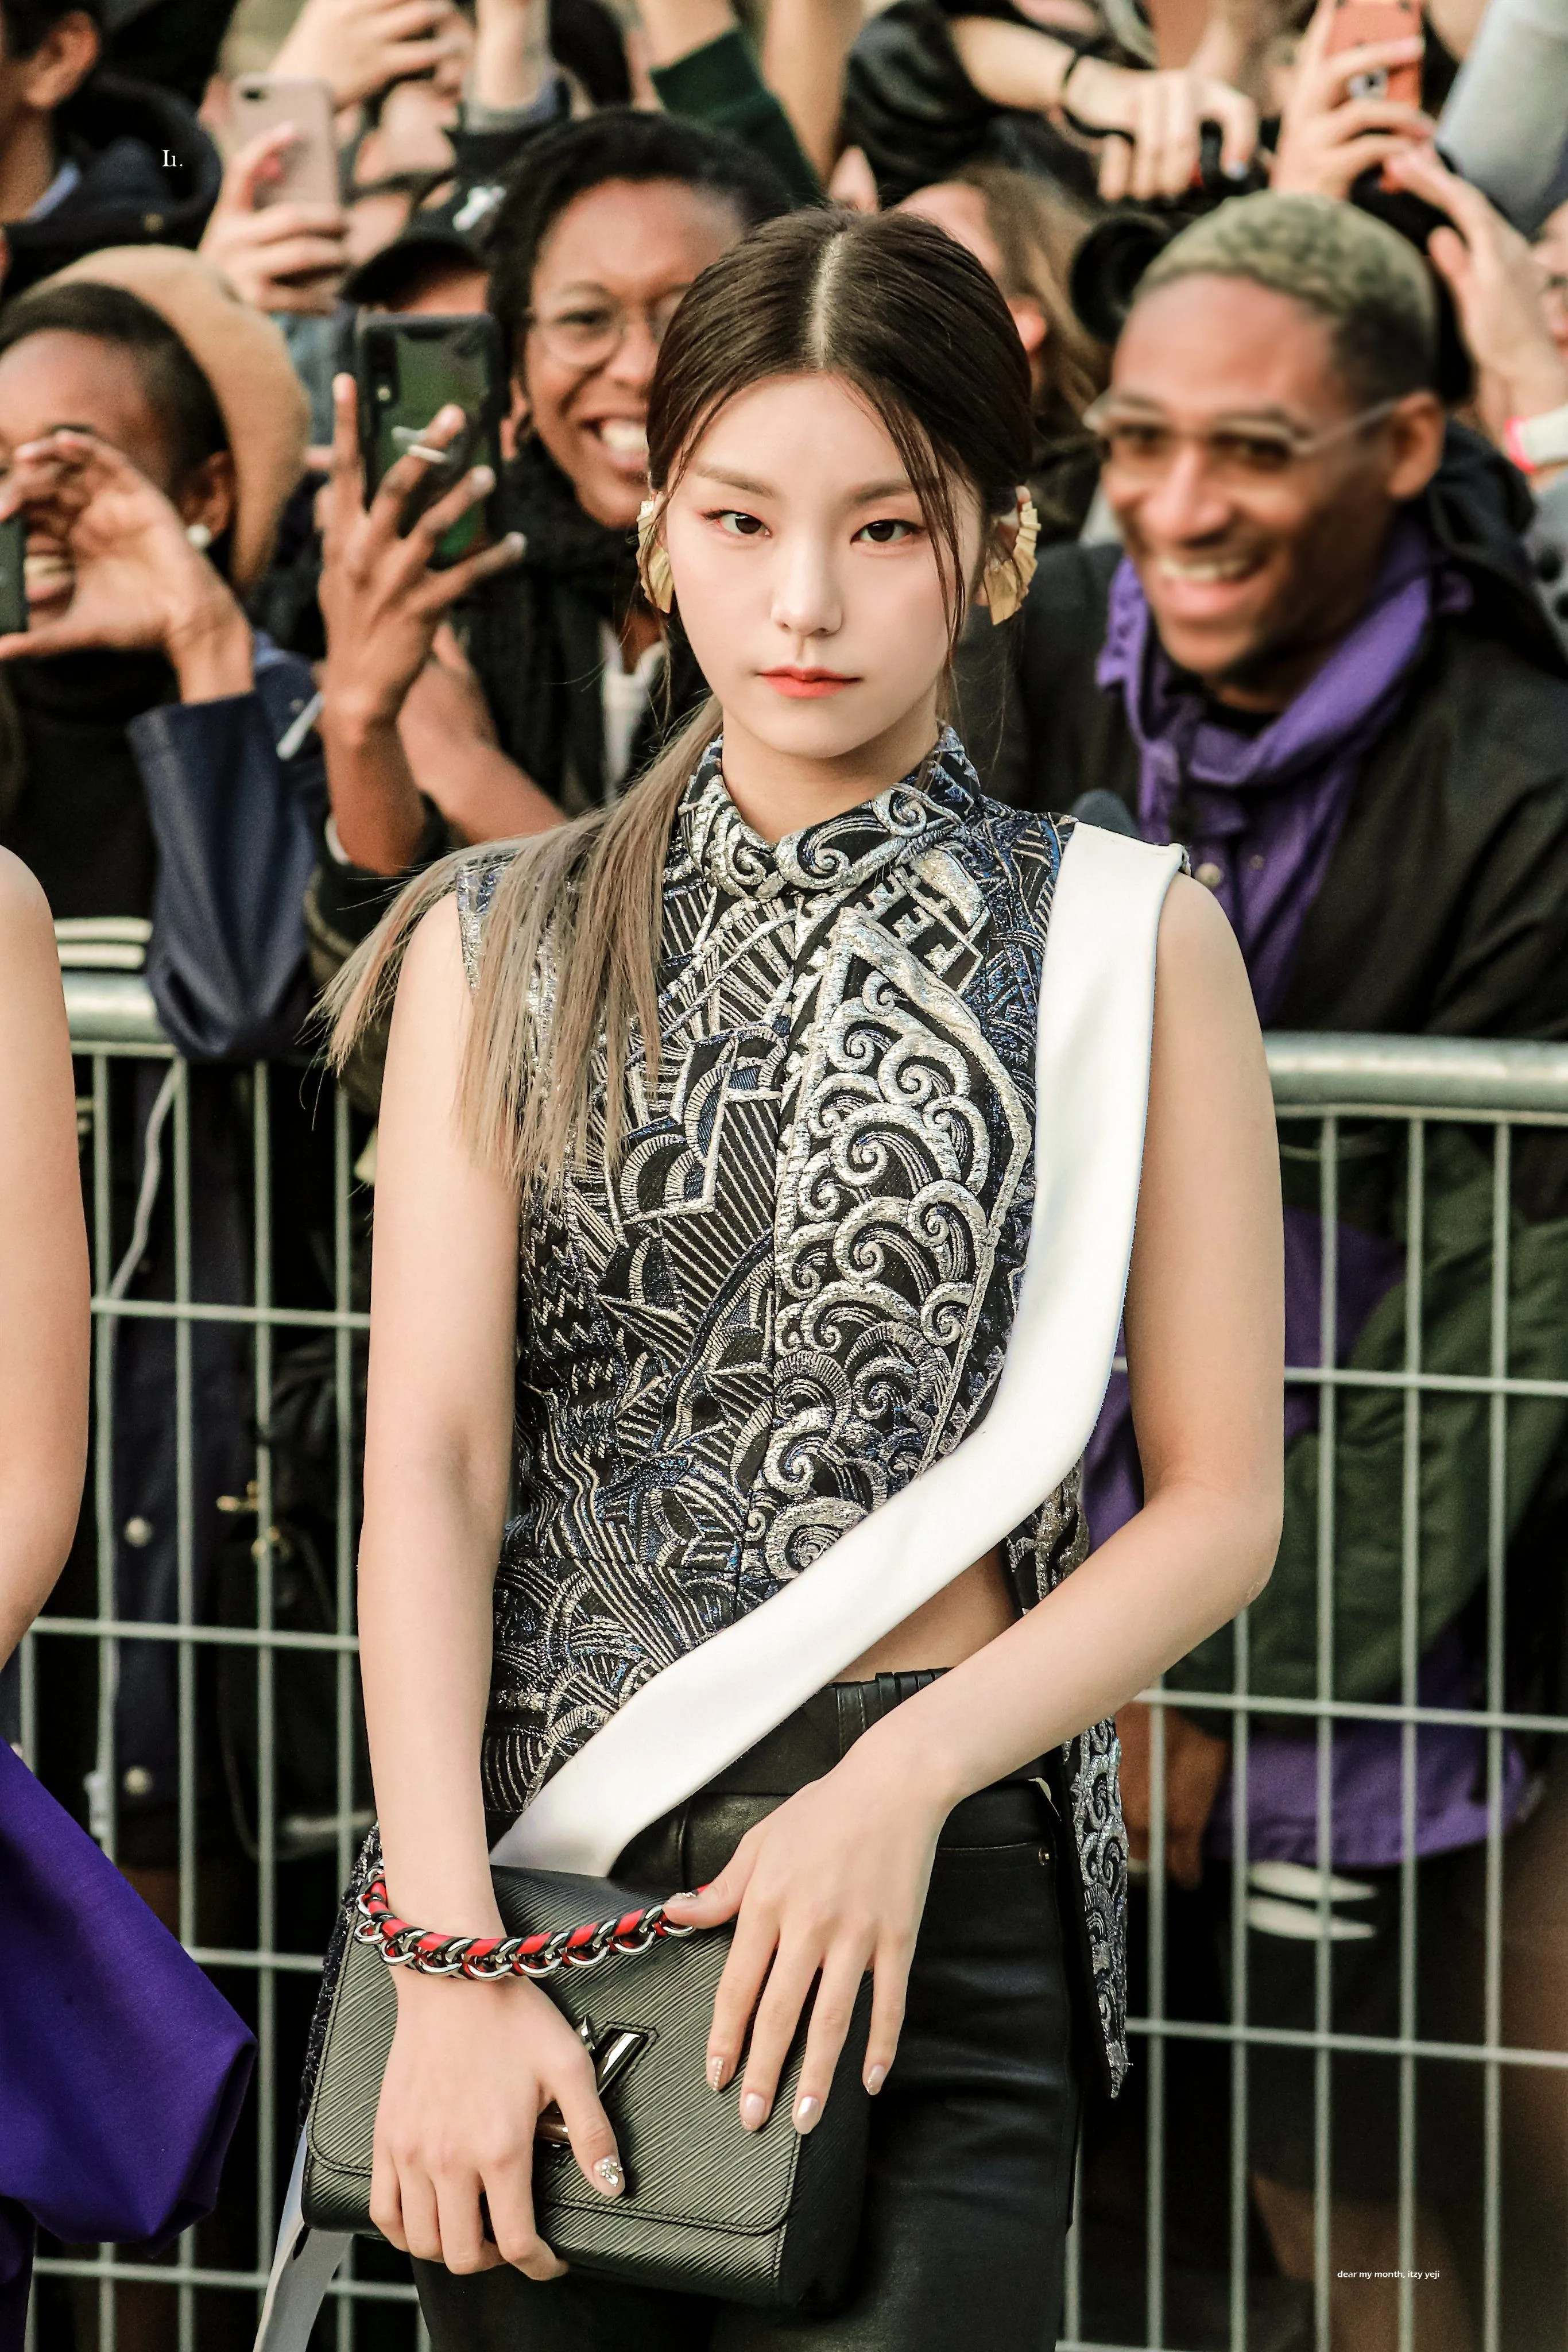 X 上的Louis Vuitton：「.@ITZYofficial is in Paris for the #LVSS20